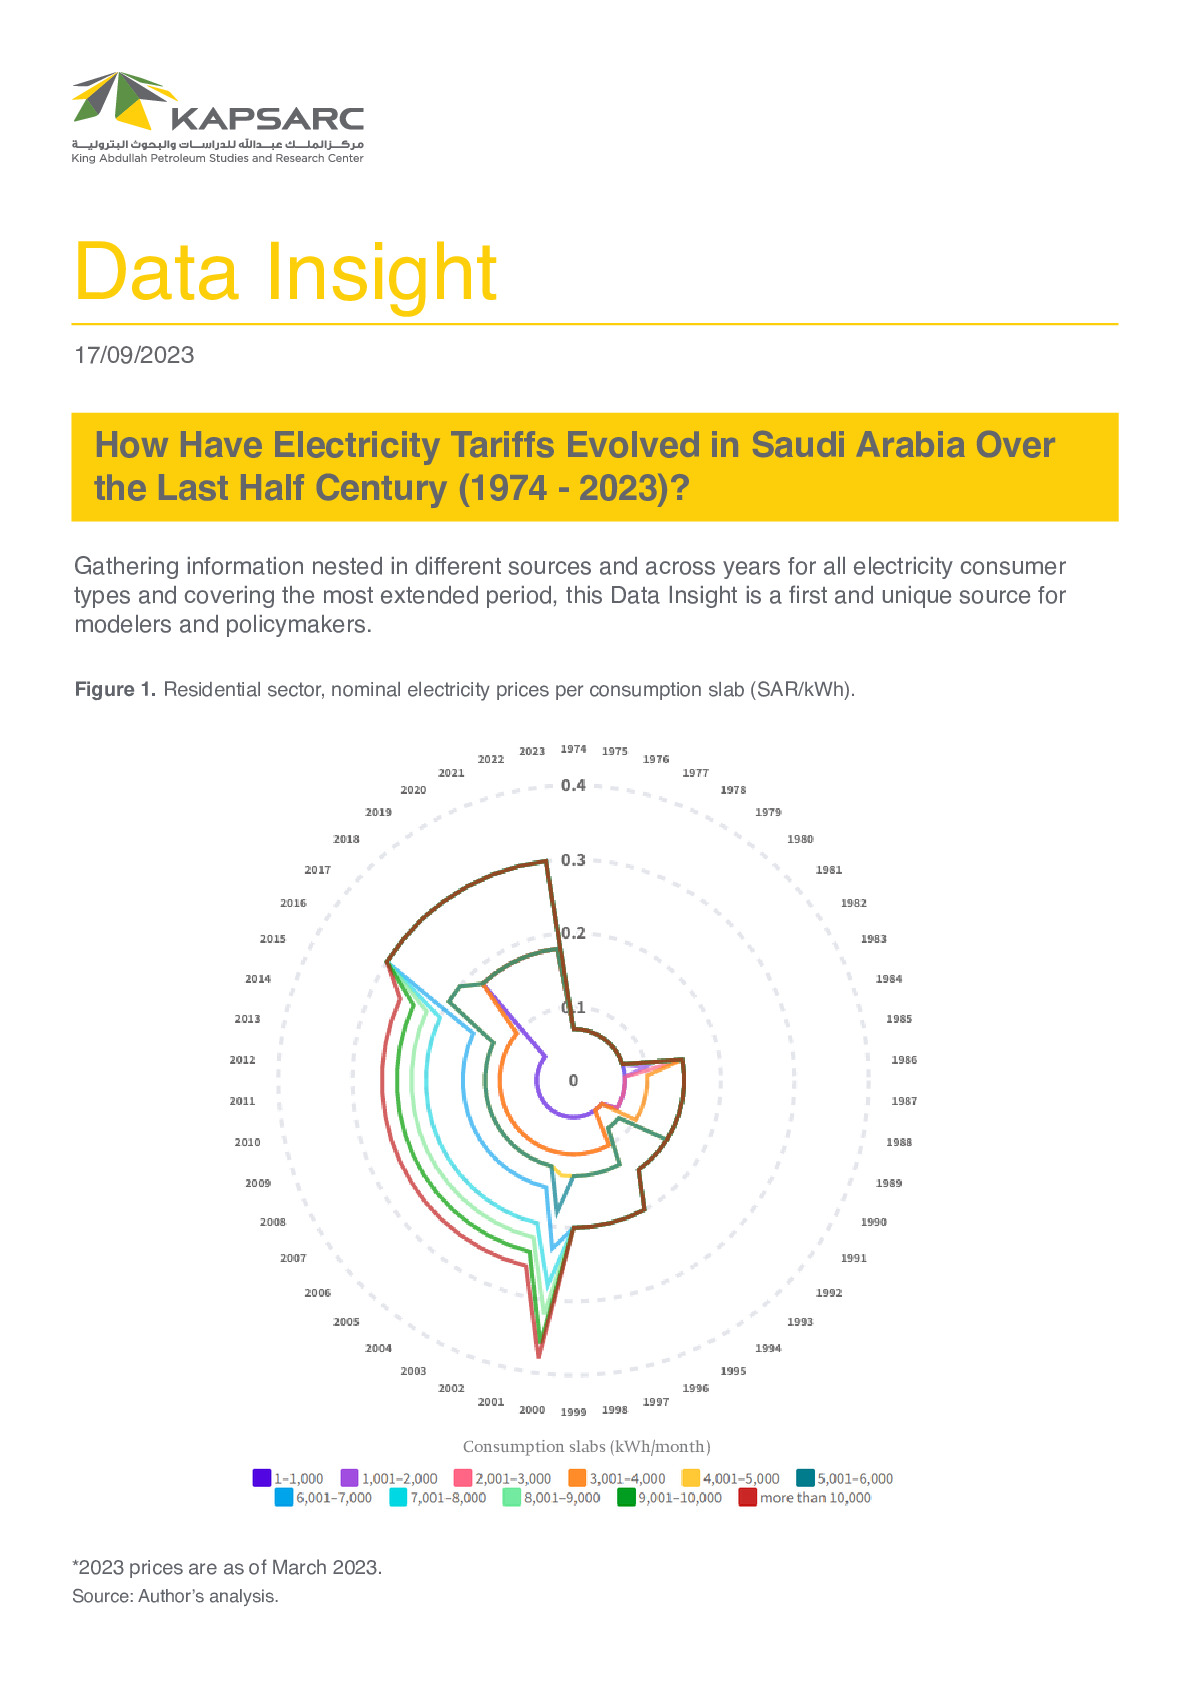 How Have Electricity Tariffs Evolved in Saudi Arabia Over the Last Half Century (1974 – 2023)?